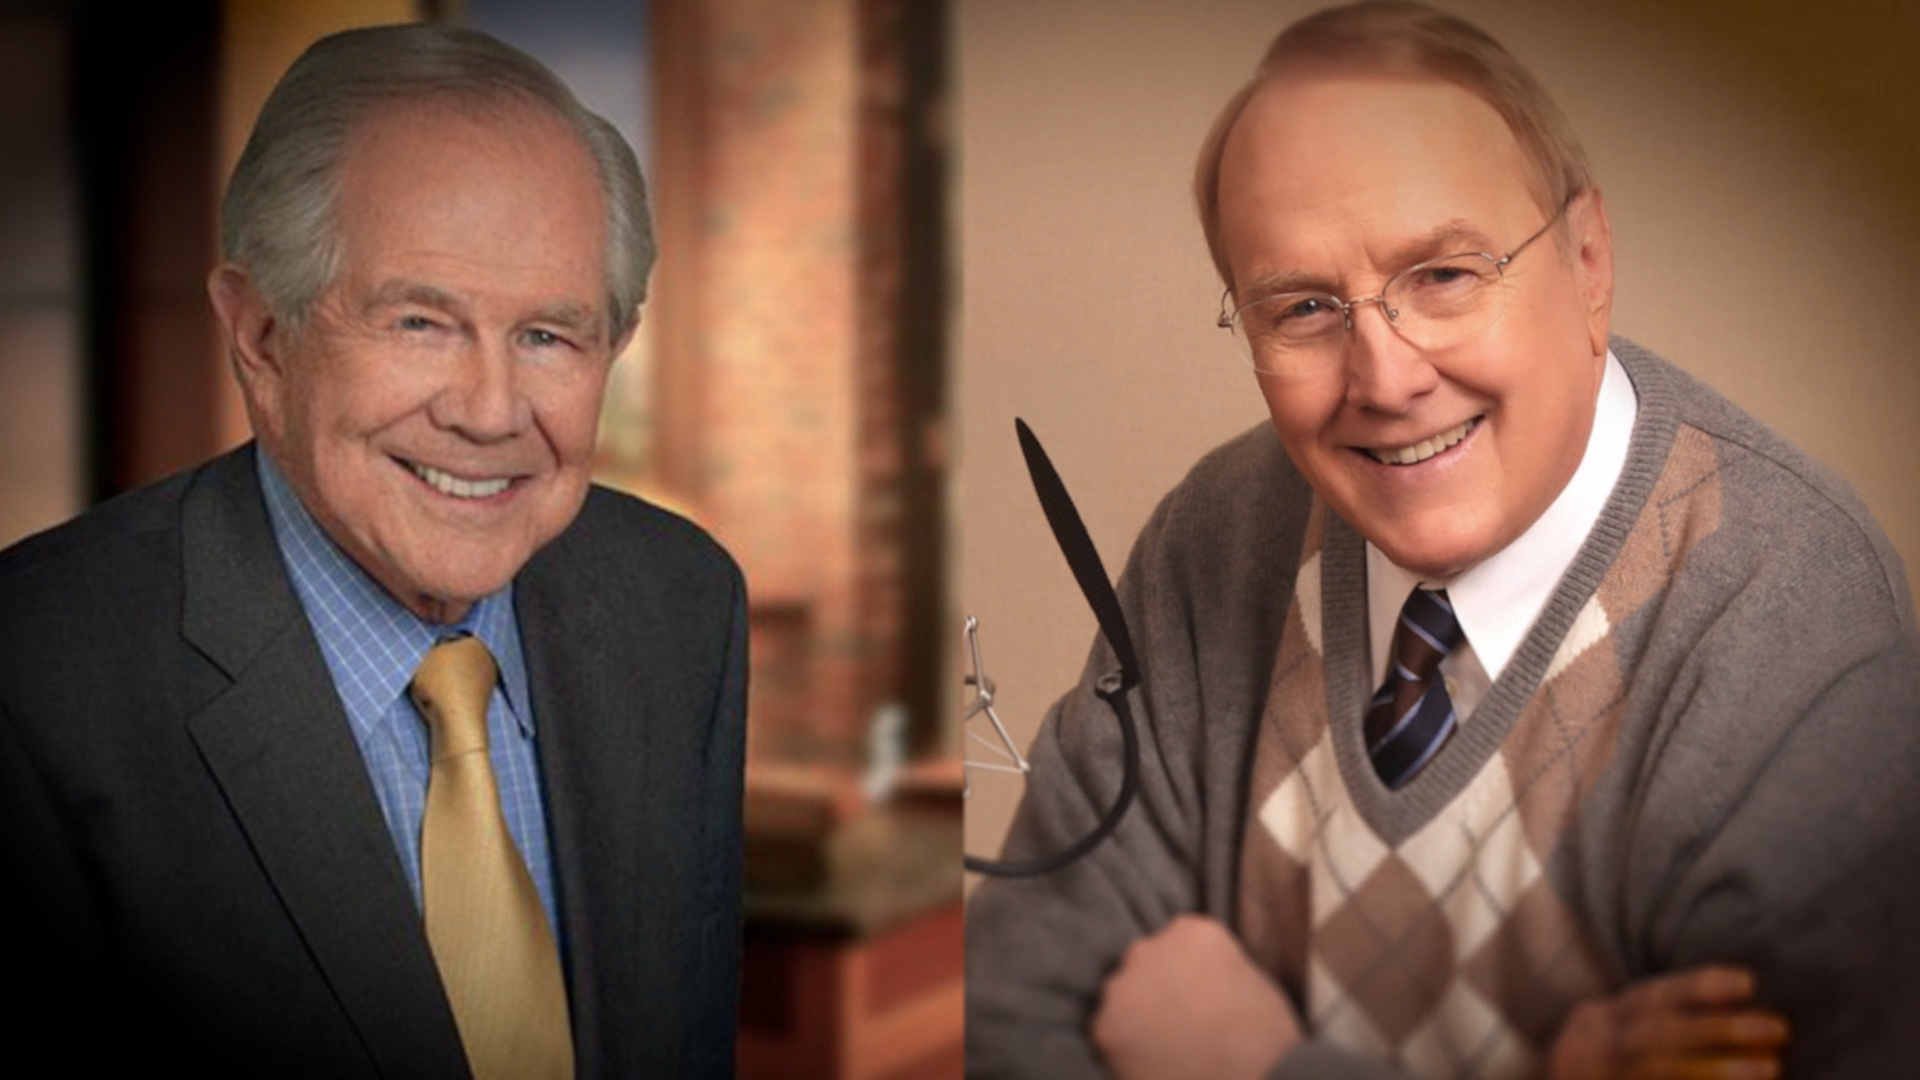 In Tribute: Dr. Pat Robertson’s Final Interview with Dr. James Dobson on Family Talk